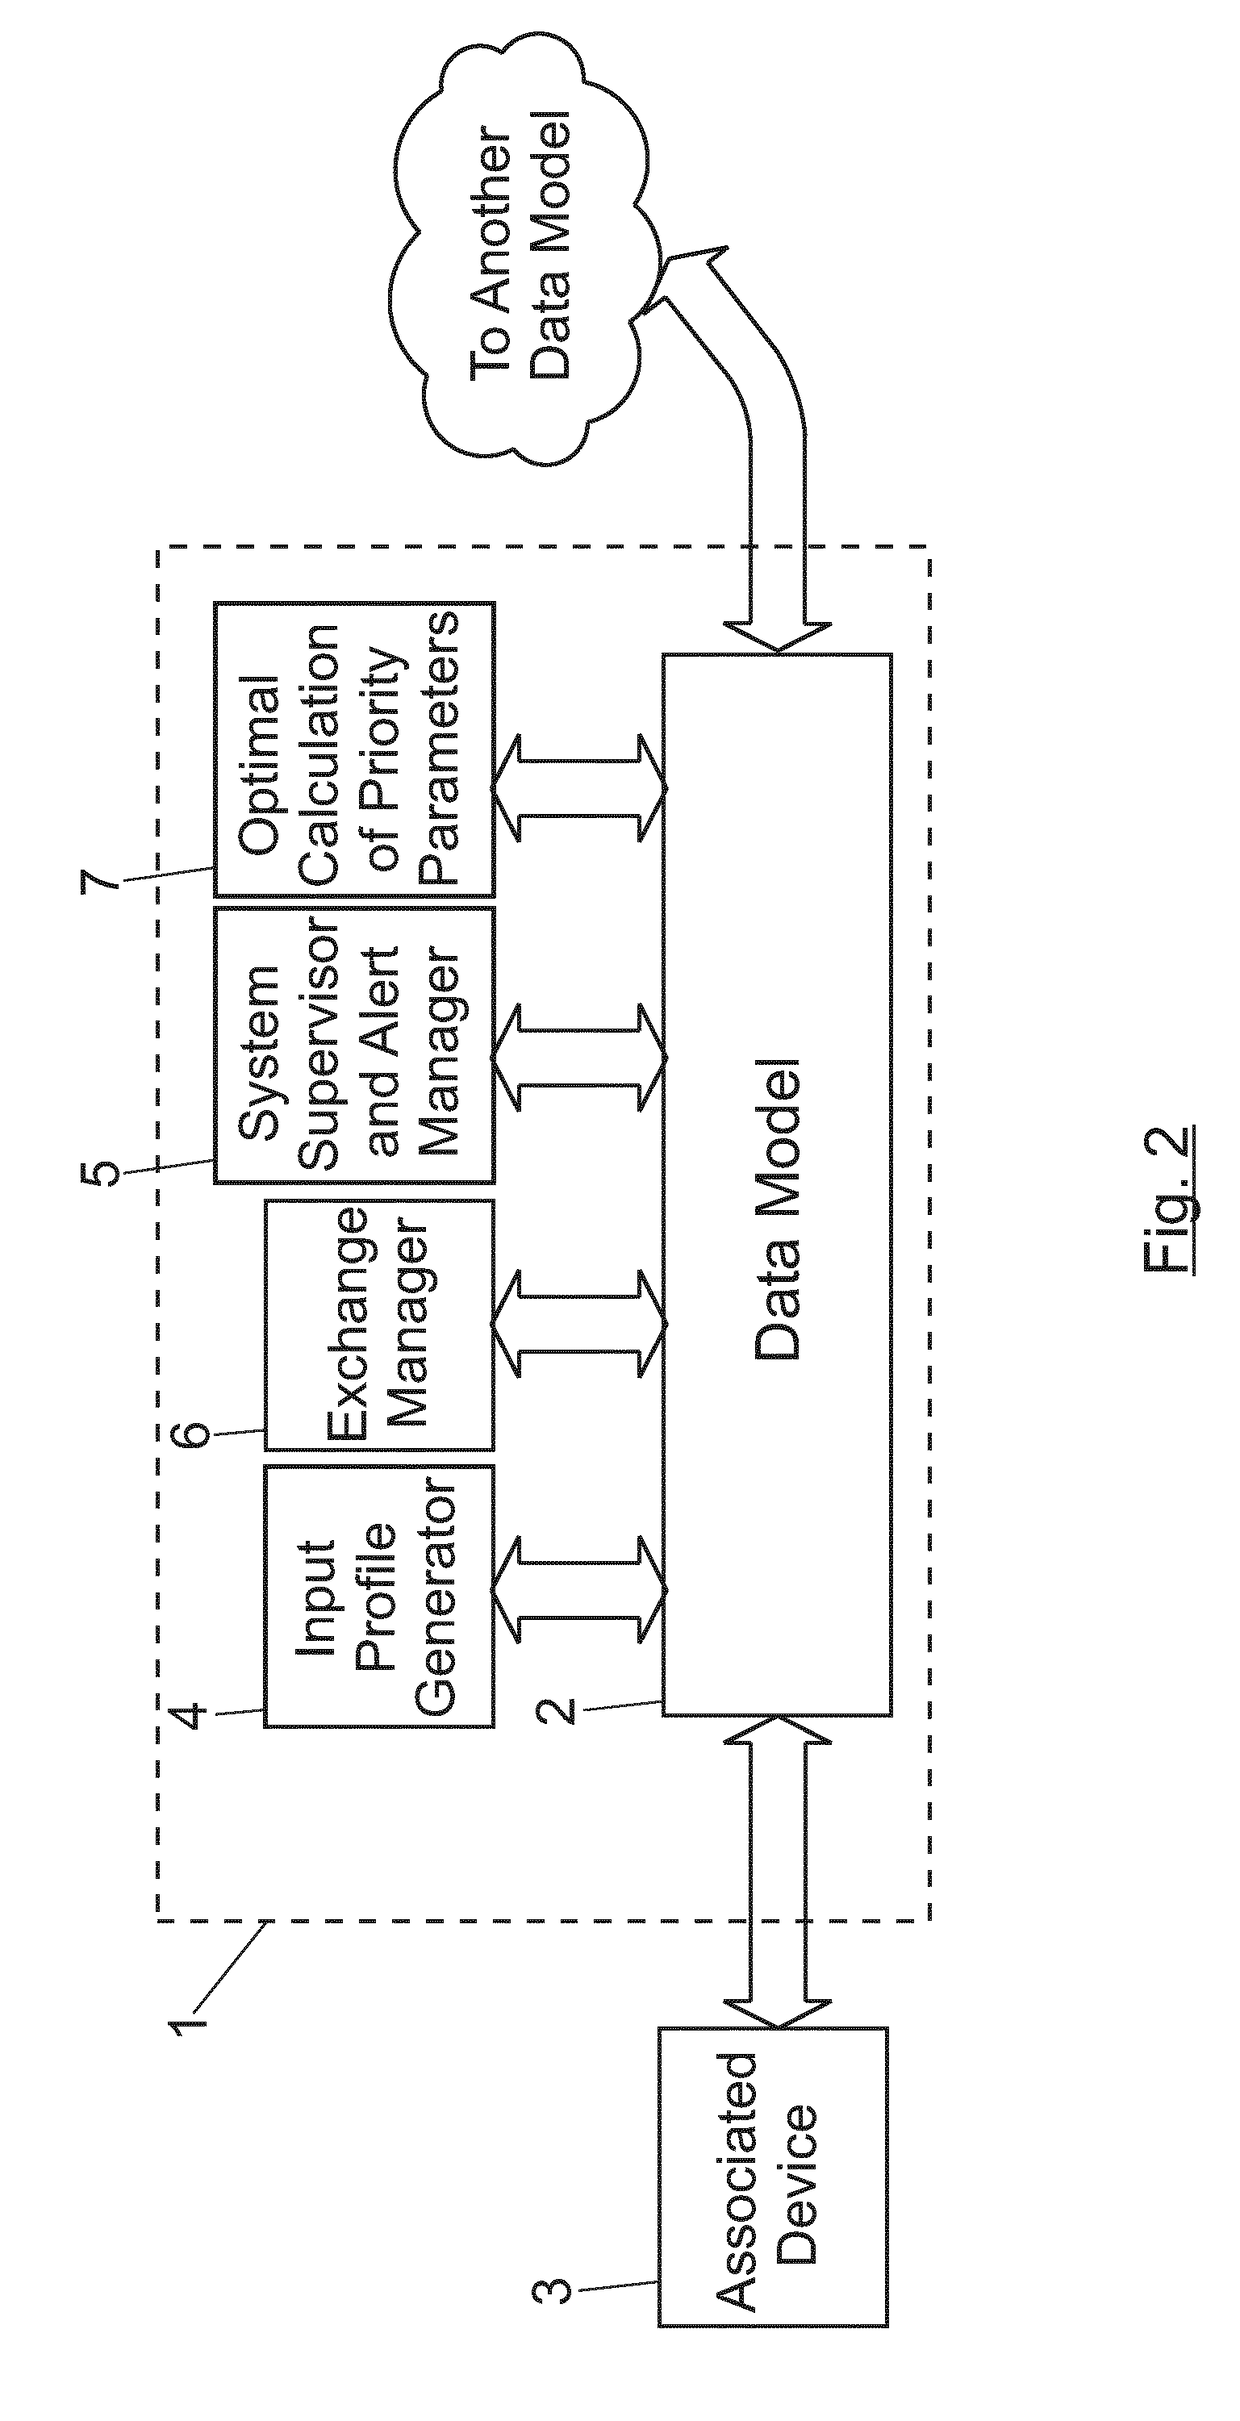 System and method for the distributed control and management of a microgrid